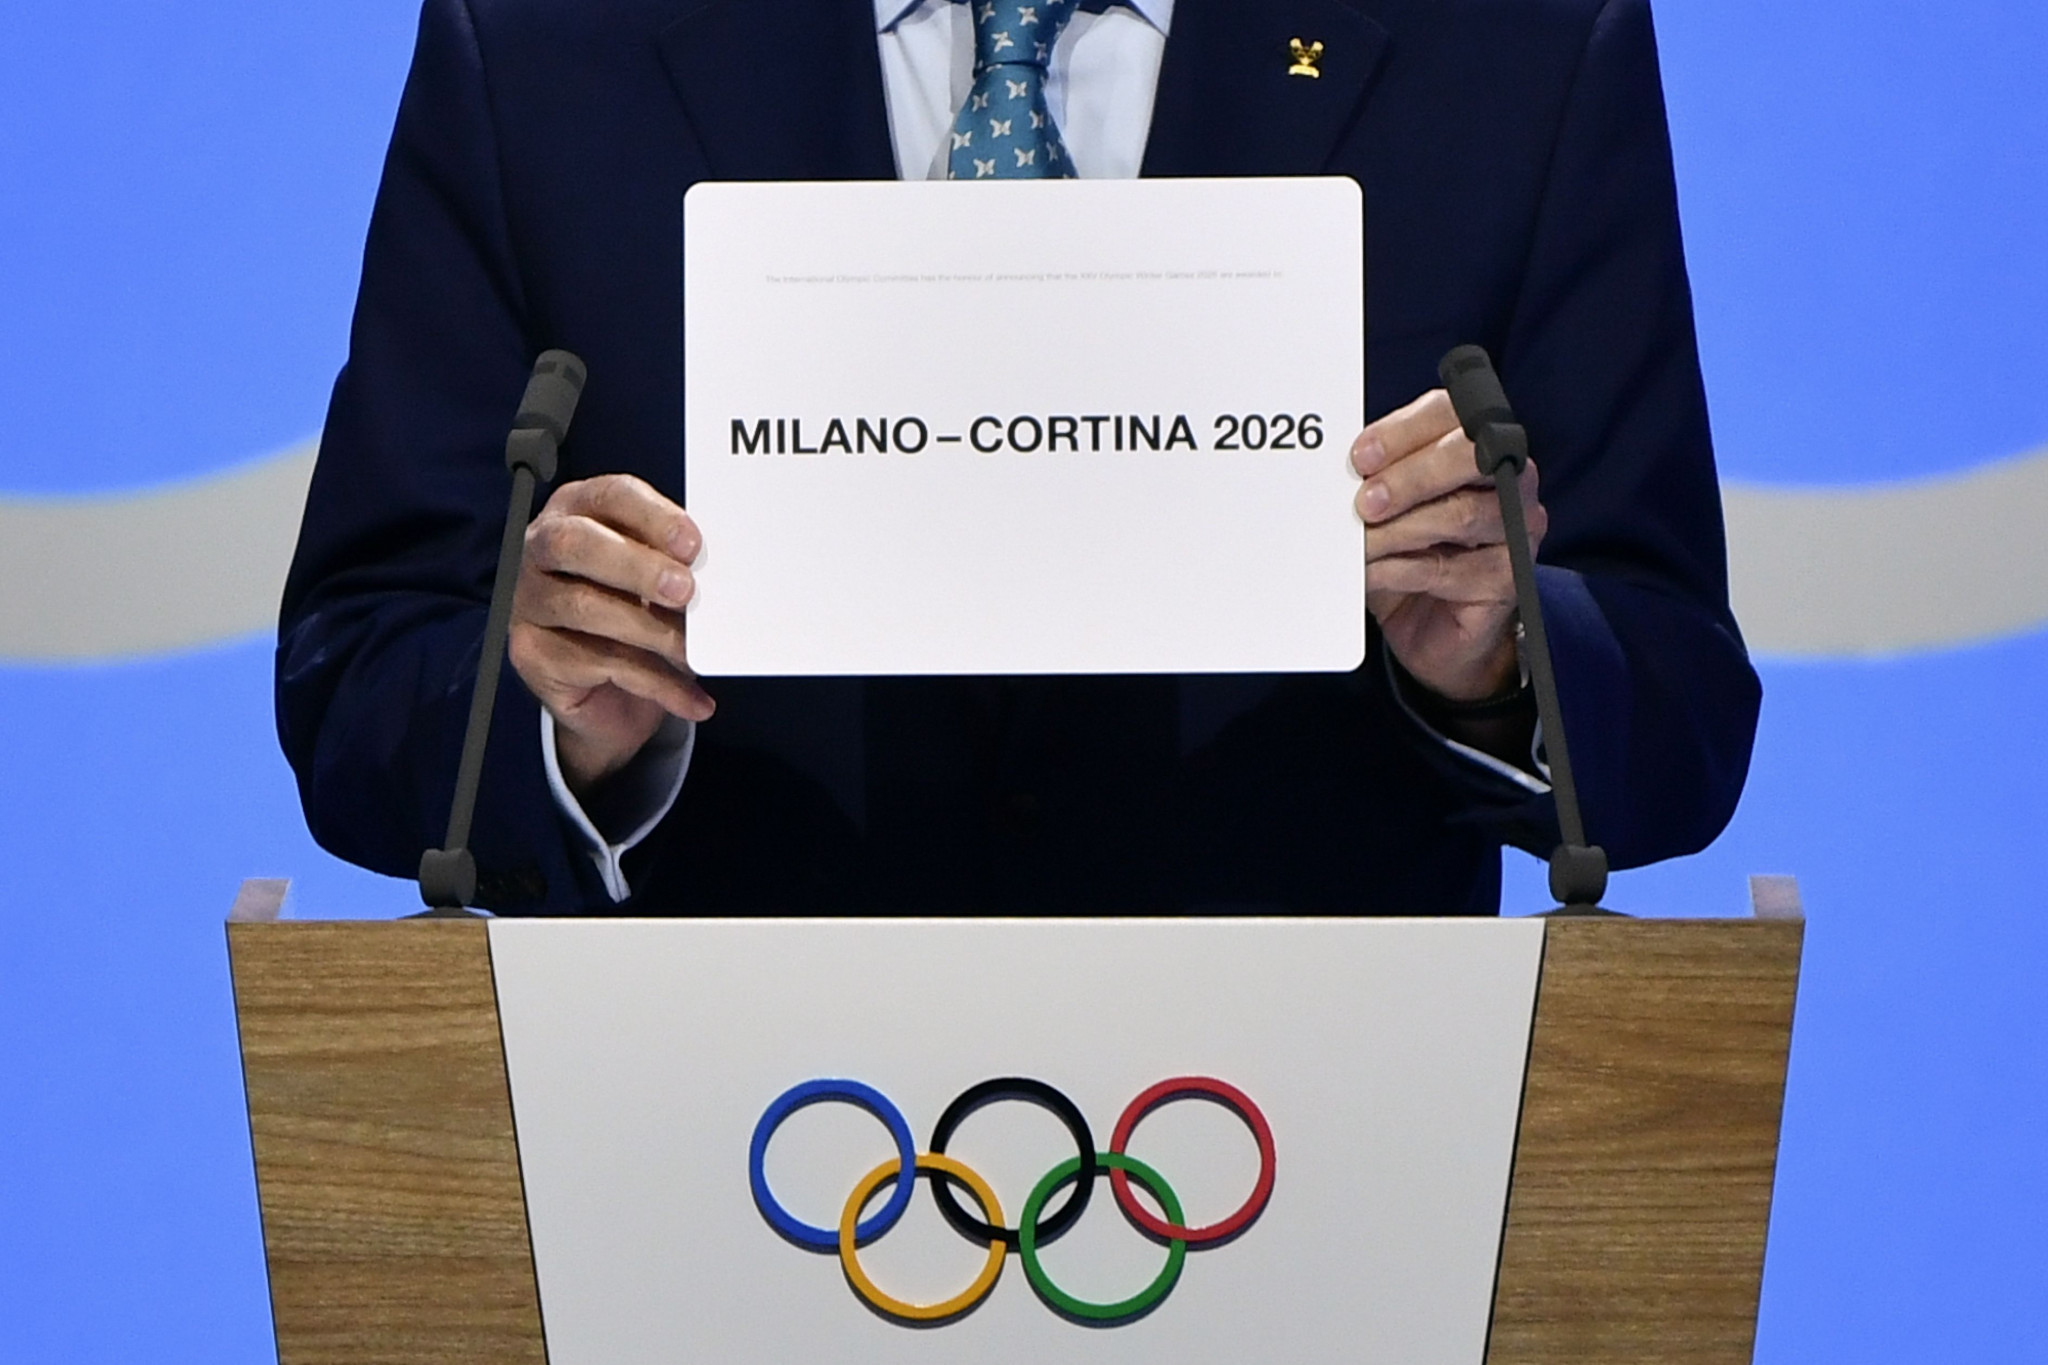 Milan Cortina 2026 will be the first Winter Olympics where the two organisations work together during the agreement ©Getty Images